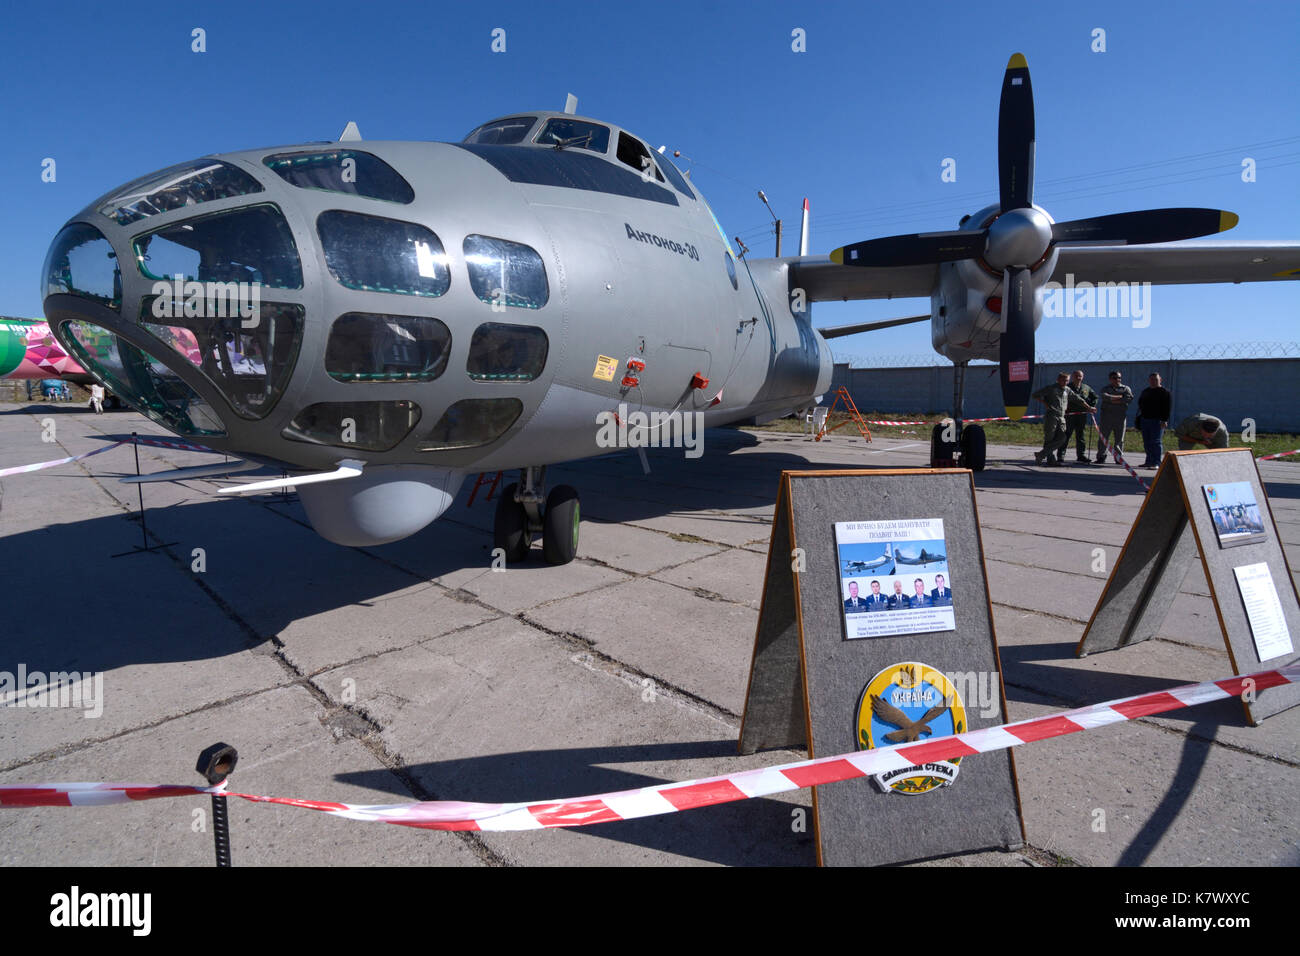 Antonov An-30 (NATO reporting name: Clank), an aerial cartography, reconnaissance and transport aircraft. Air show at Zhuljany airport. 16.09.2016 Stock Photo